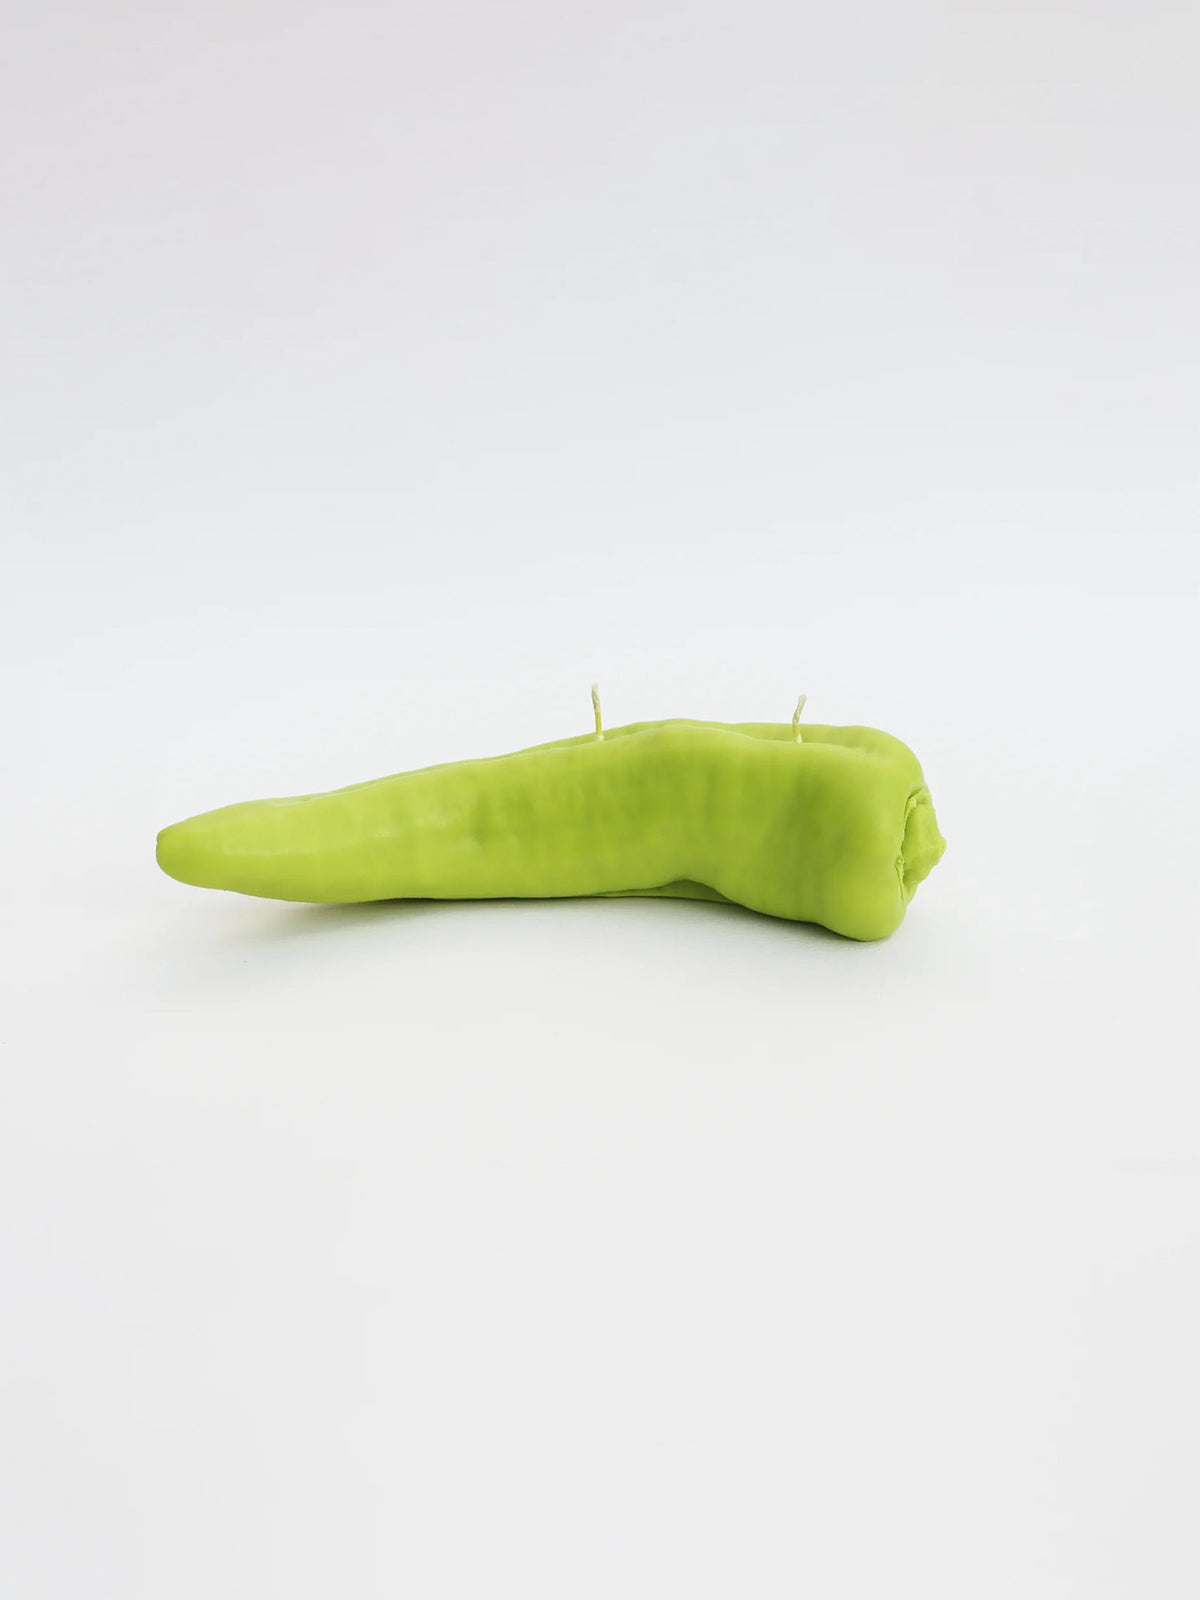 A Green Chilli Candle by Nonna&#39;s Grocer on a white surface.